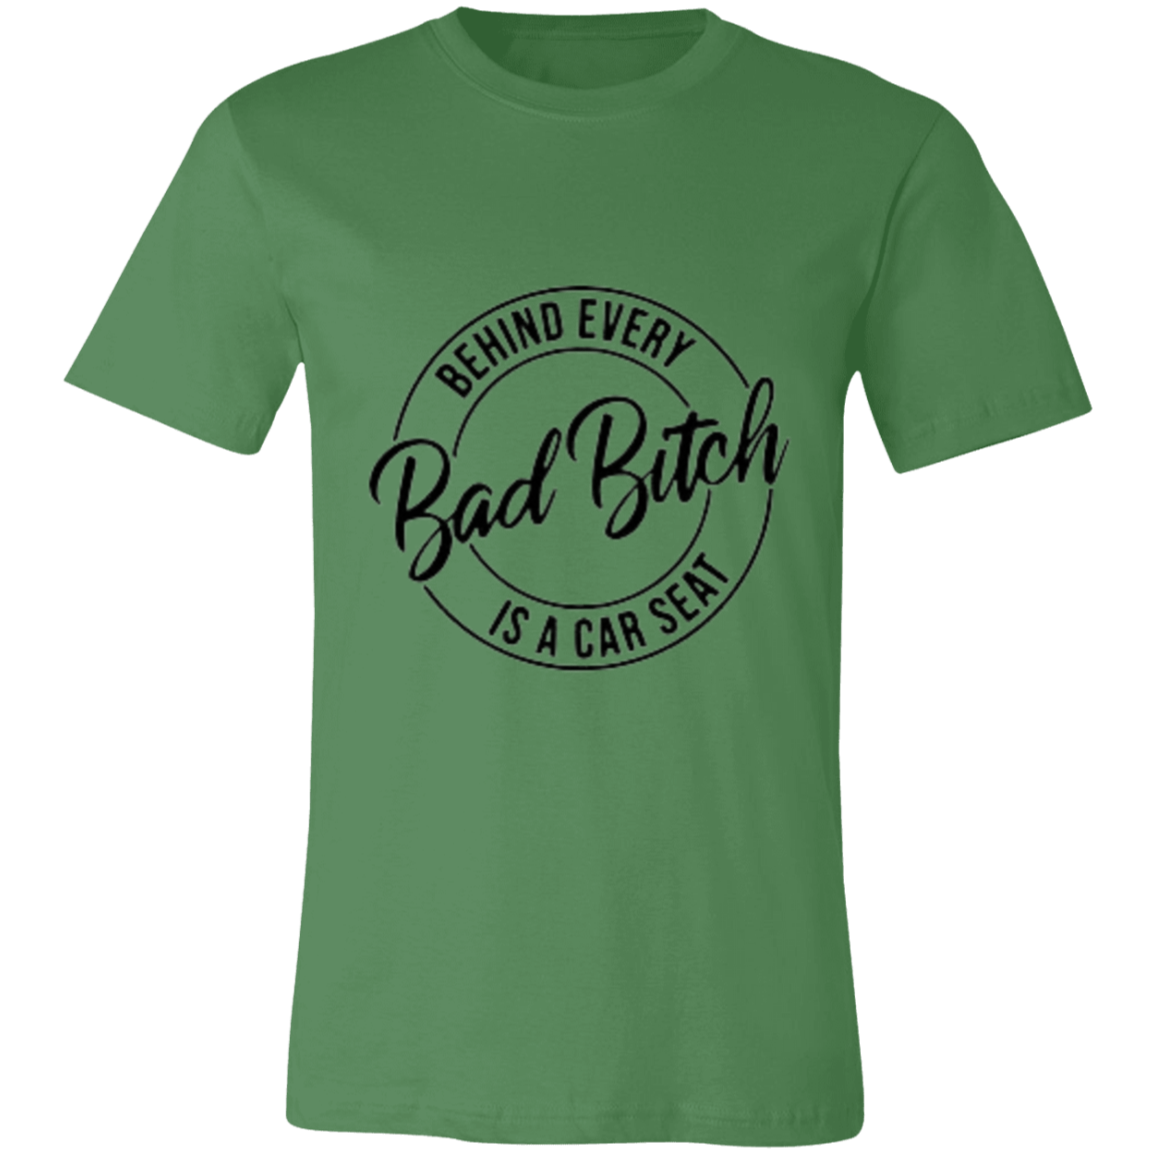 Behind Every Bad Bitch Jersey Short-Sleeve T-Shirt